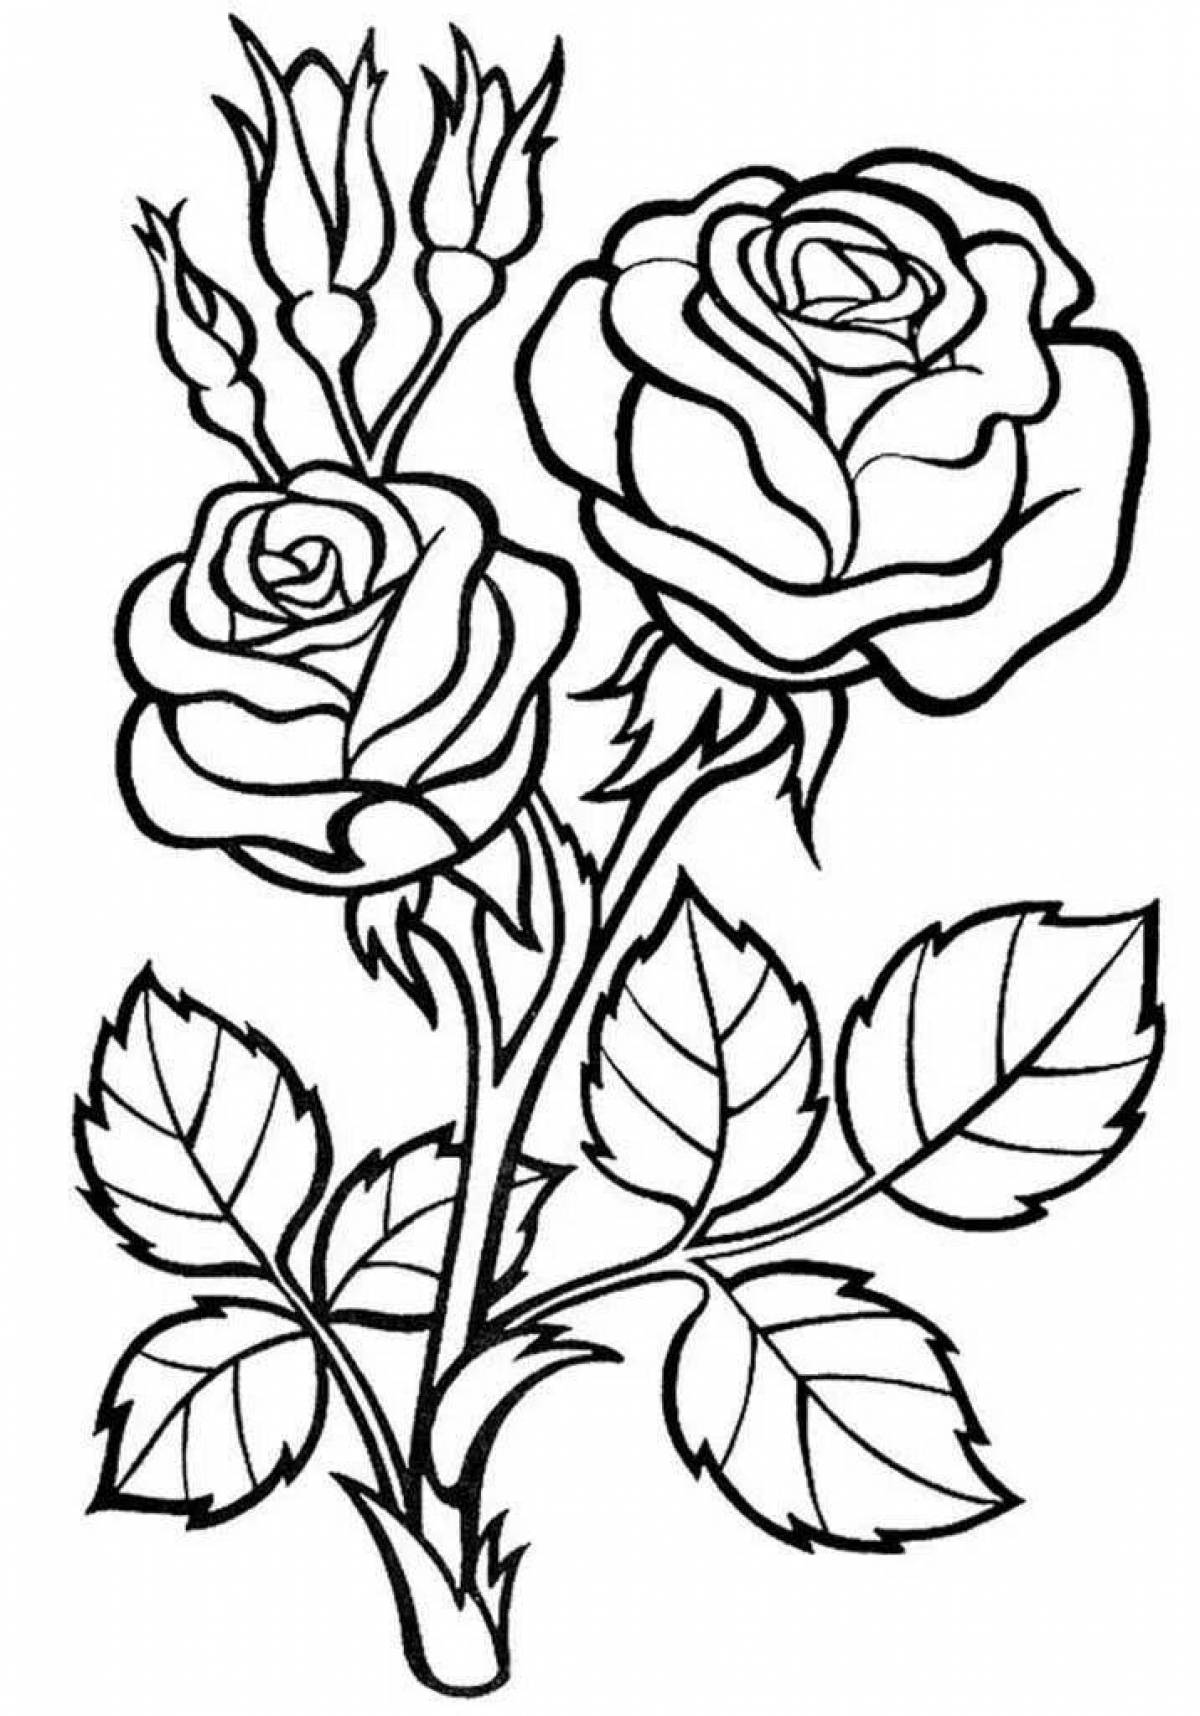 Exquisite rose coloring page